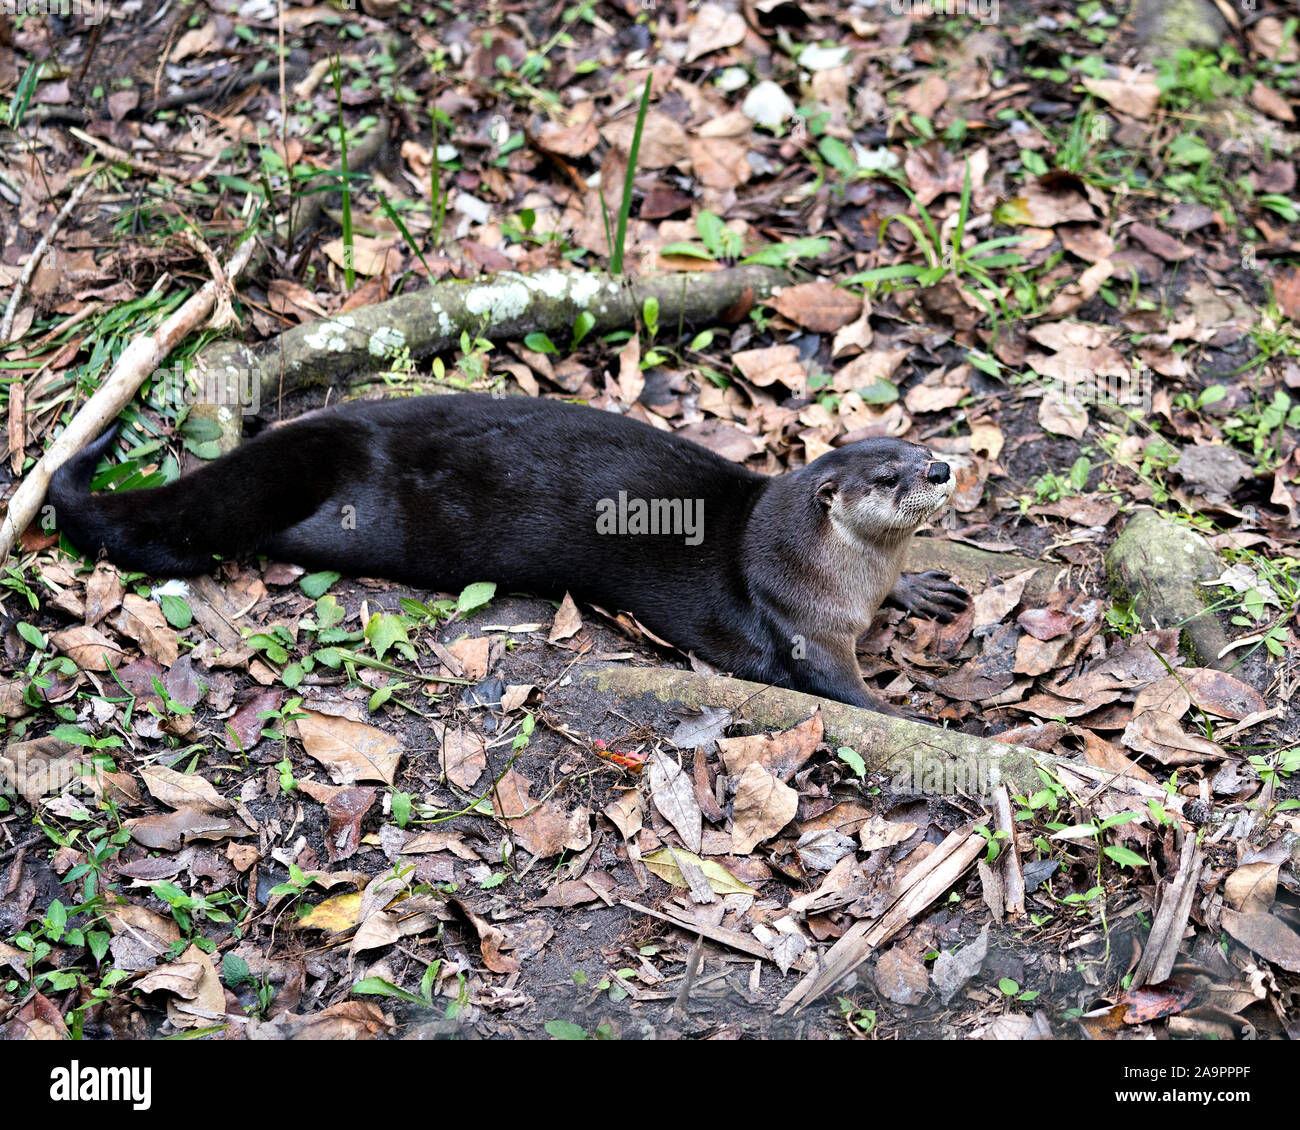 Otter animal resting in a bed of foliage and displaying its body, head, nose,ears, eyes, tail, paws in its environment and surrounding. Stock Photo